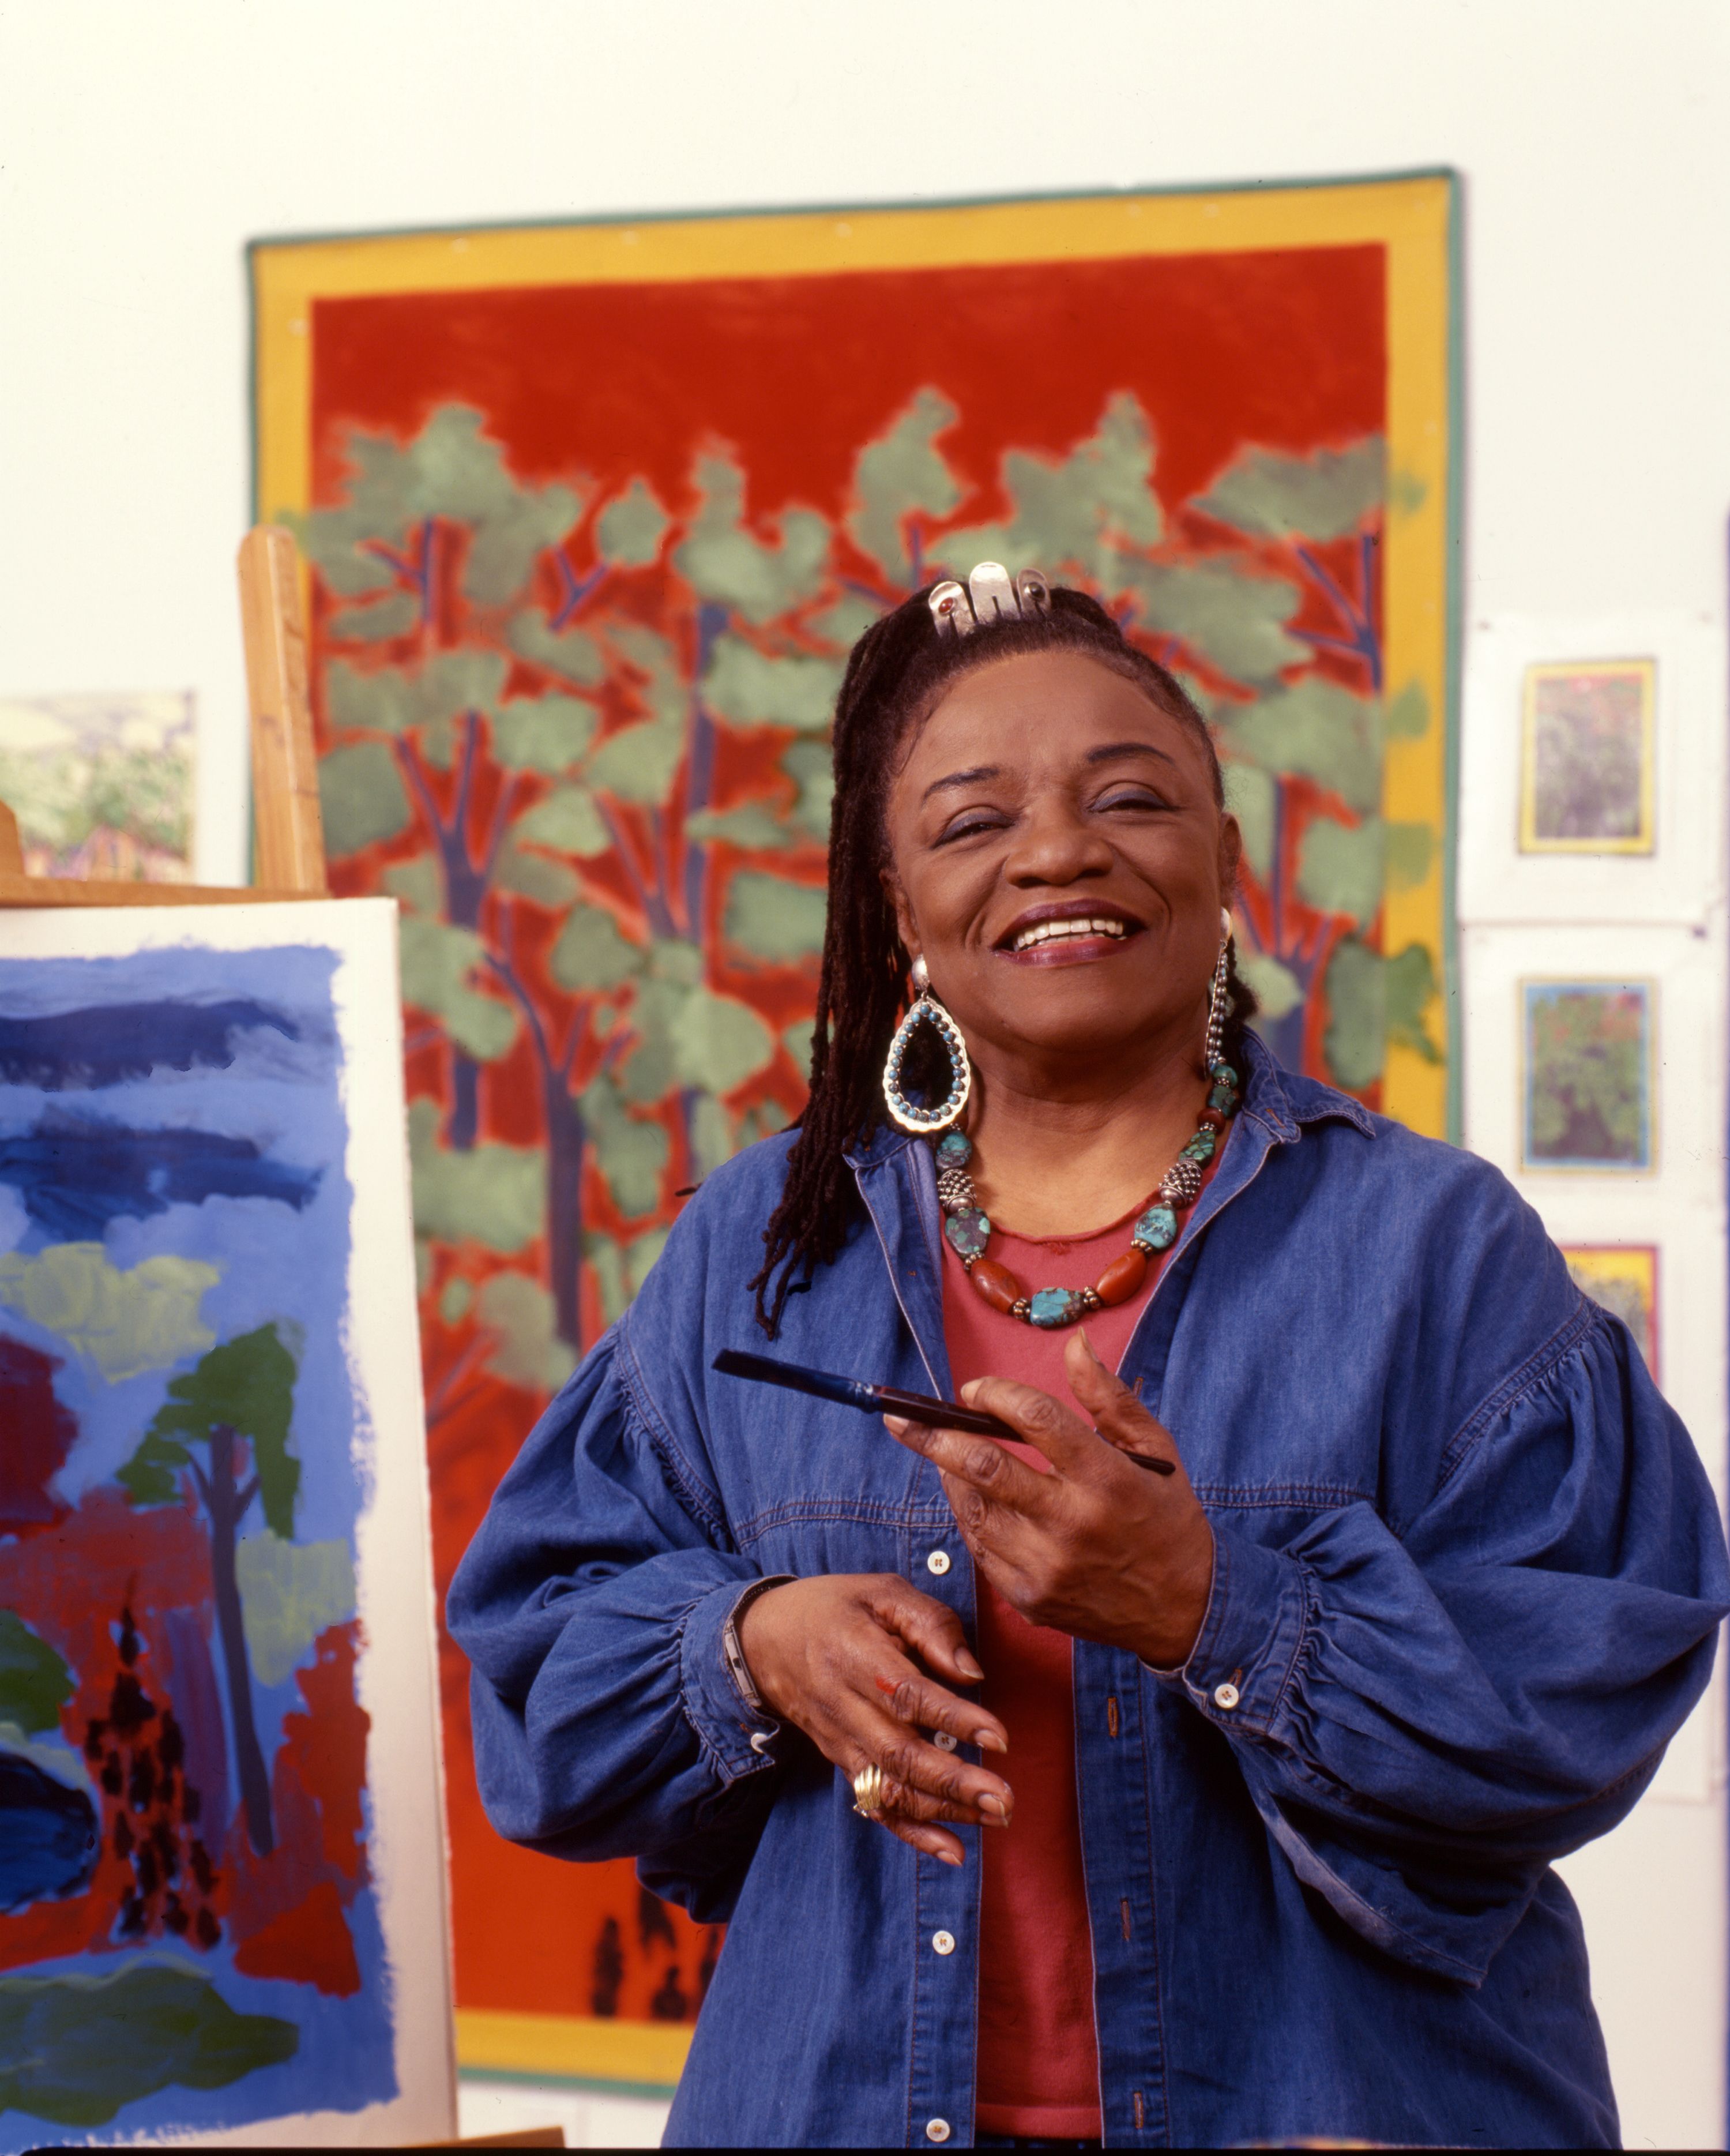 Faith Ringgold, Whose Art Made Quilts a Potent Canvas, Dies at 93